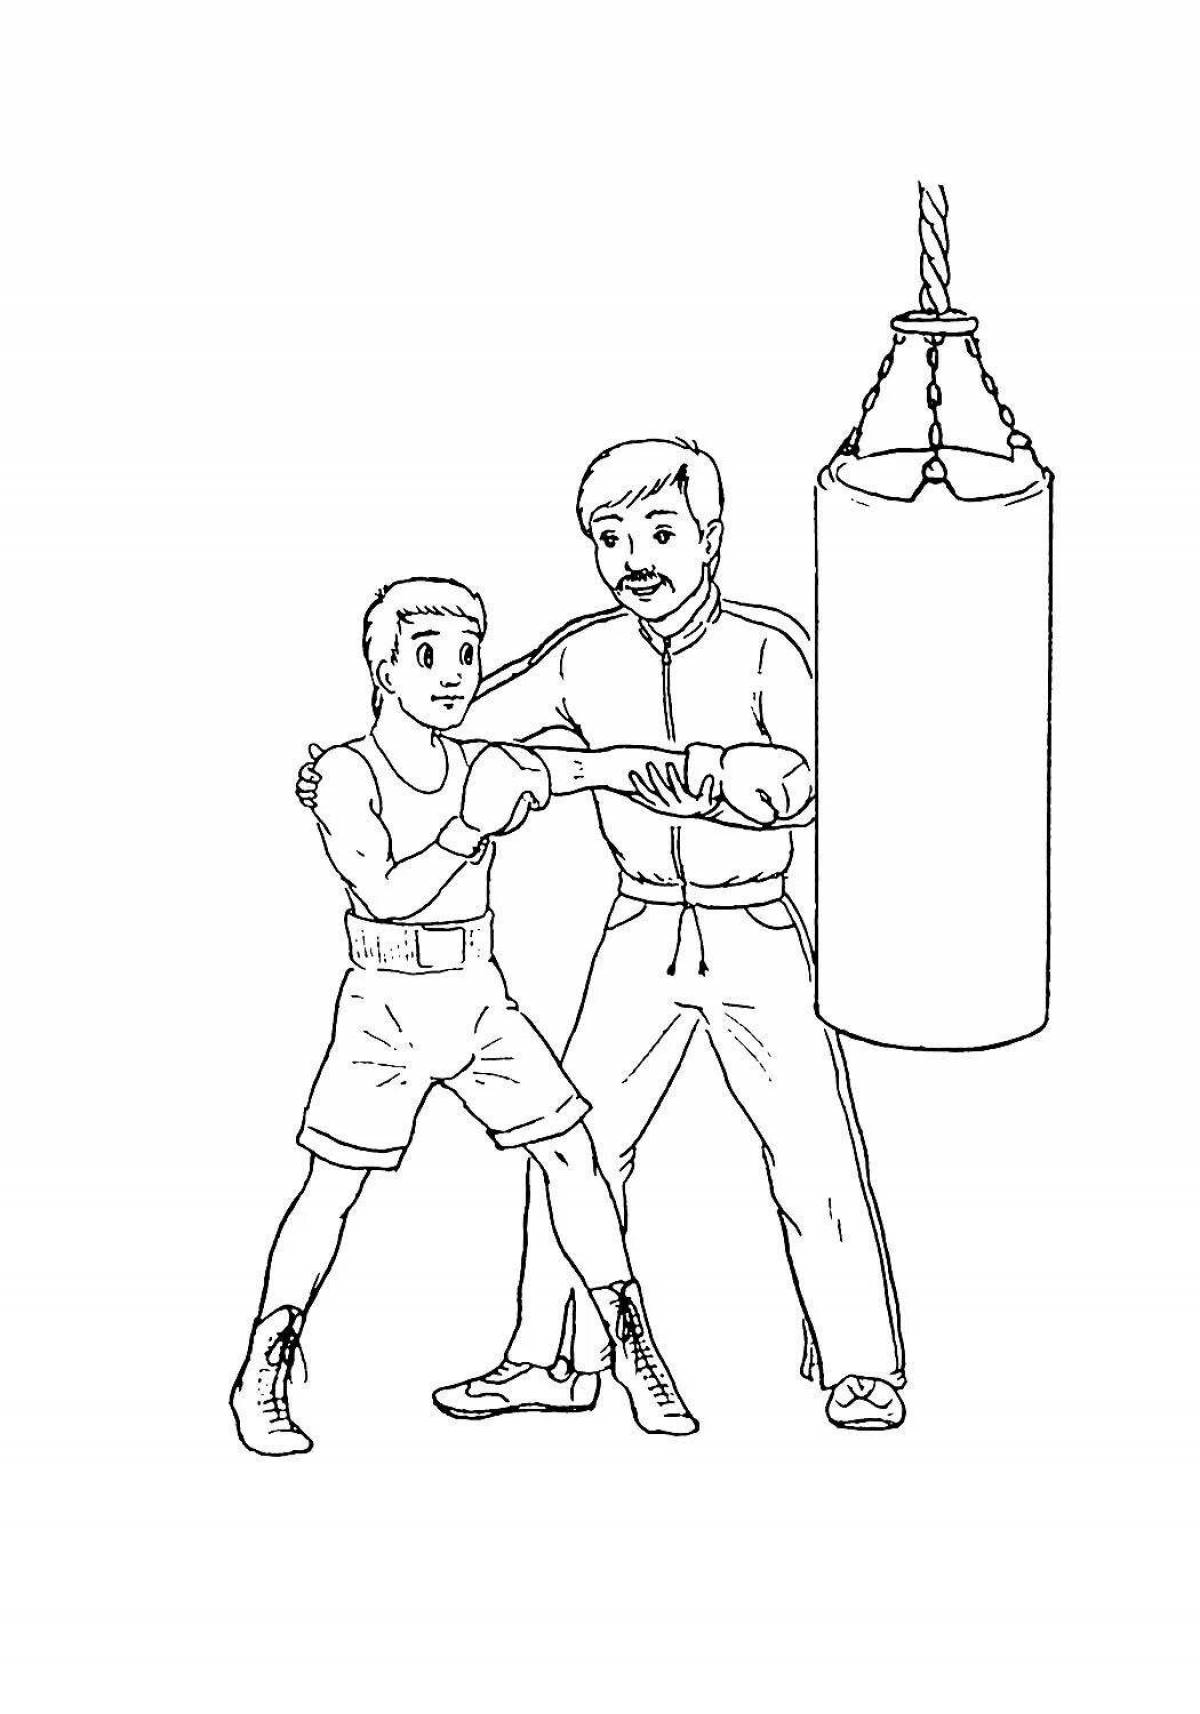 Colorful boxer coloring page